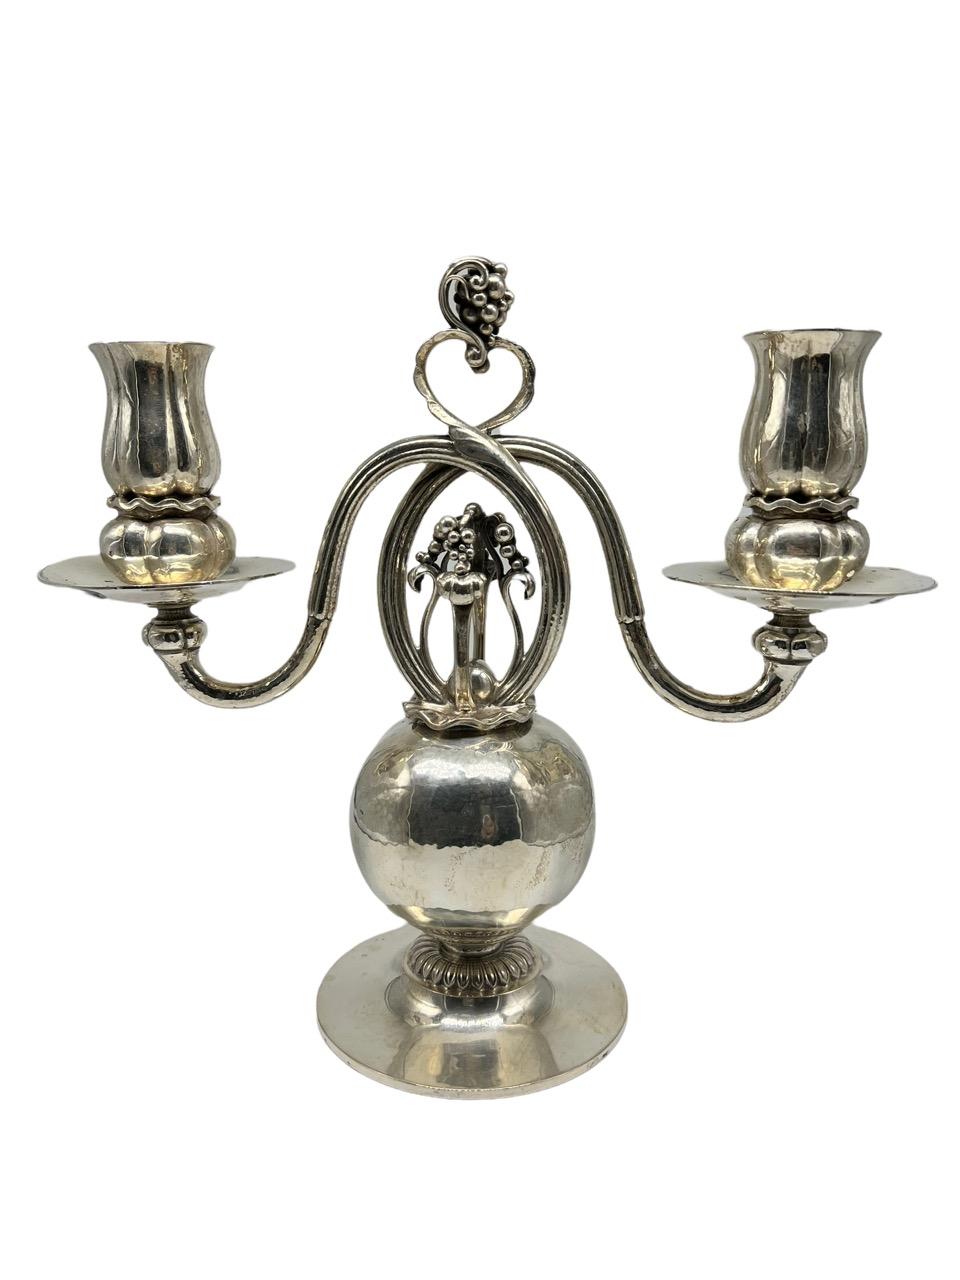 20th Century Danish two matching pairs (4) Georg Jensen sterling silver pomegranate candelabras. Handmade in Copenhagen, Denmark. One of the most beautiful pairs of candelabra ever produced by the Georg Jensen Company, the “Pommies” which were